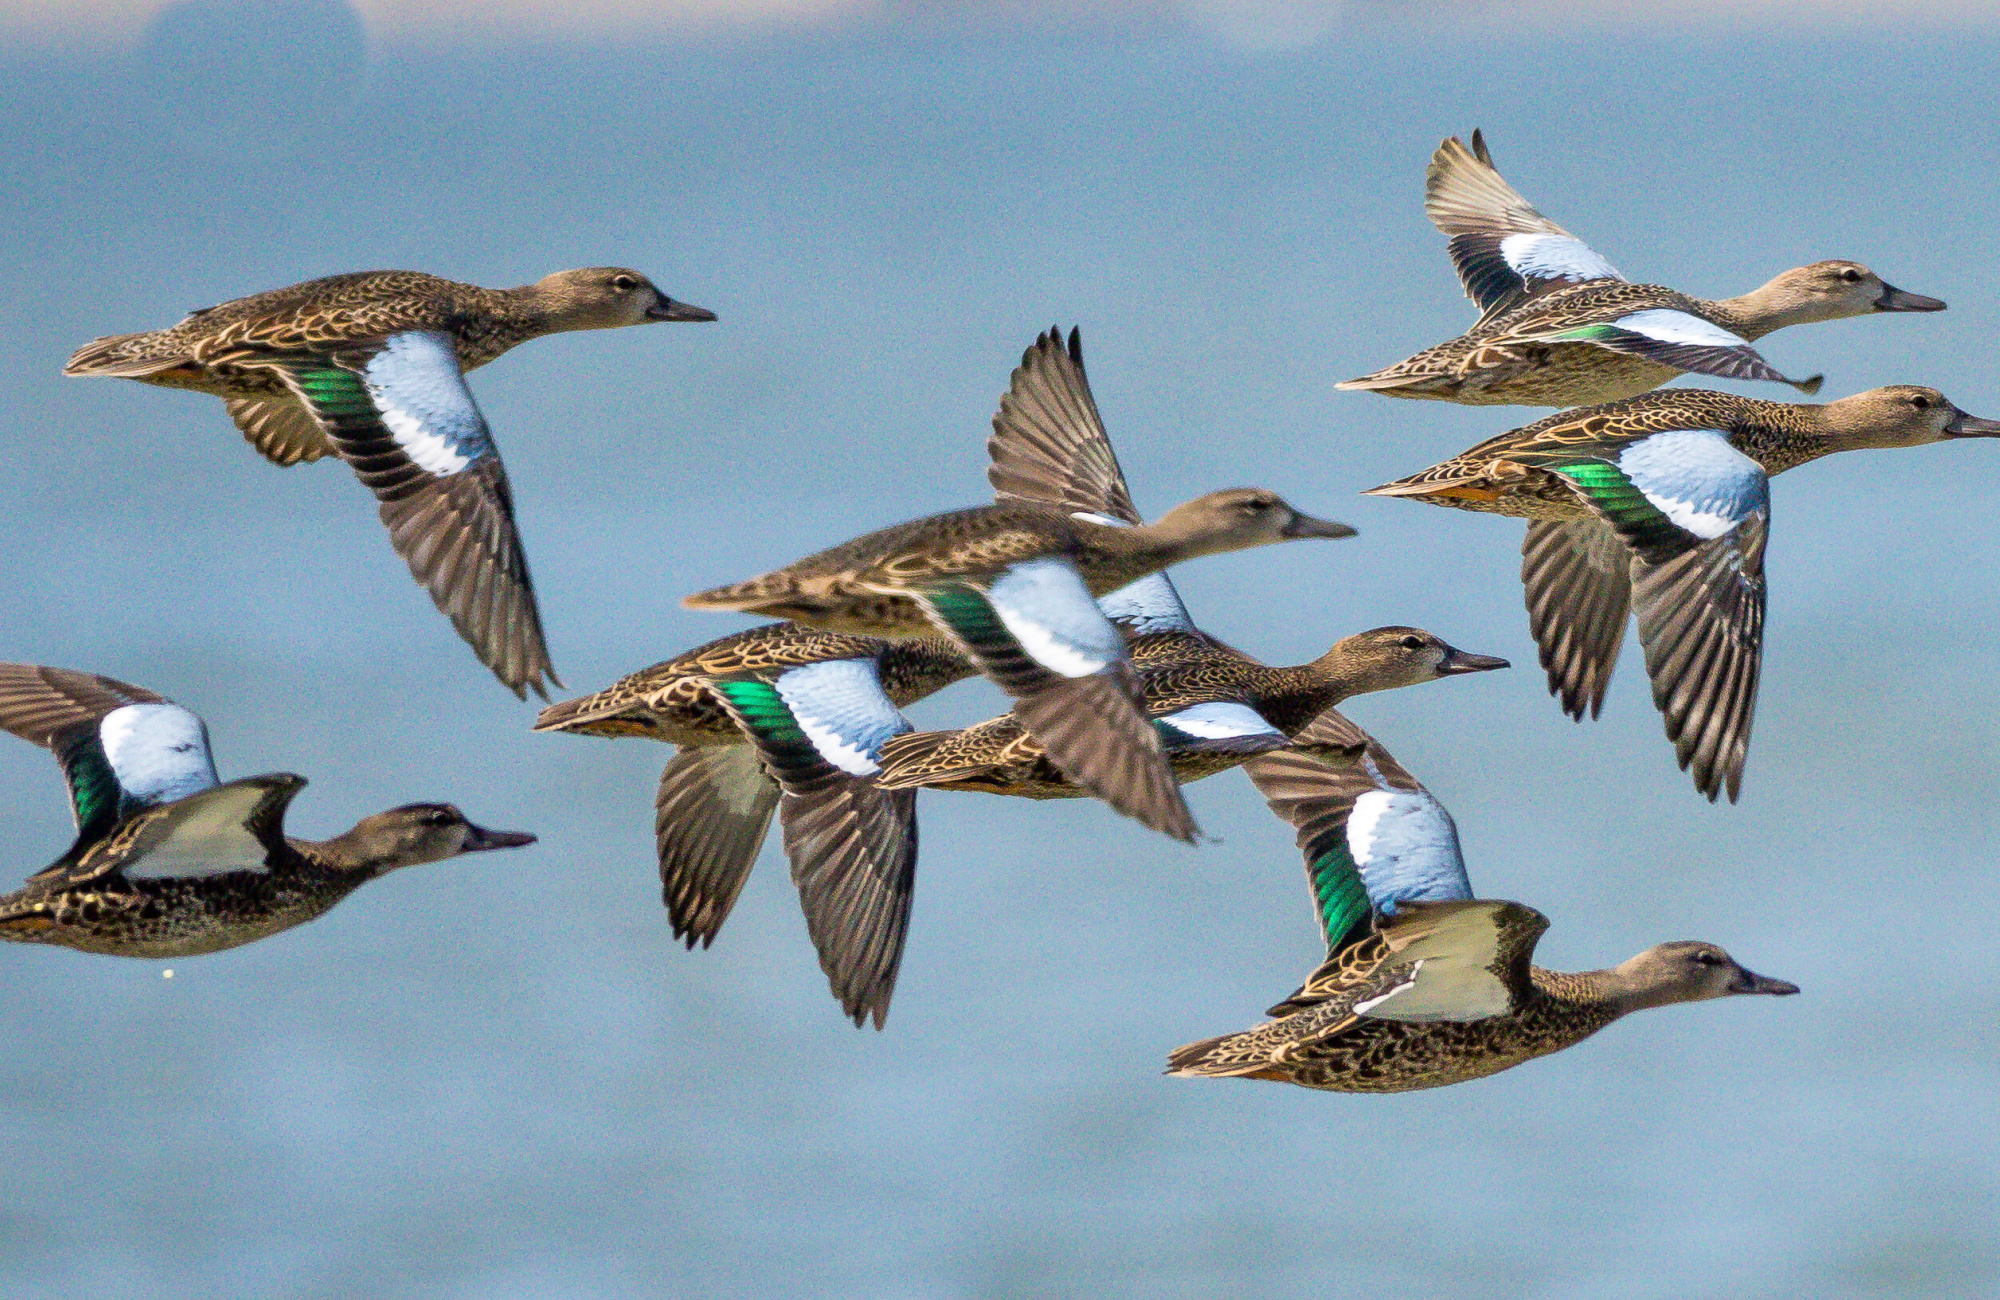 USDA lifts a ban on importing hunter-harvested waterfowl meat from Canada.